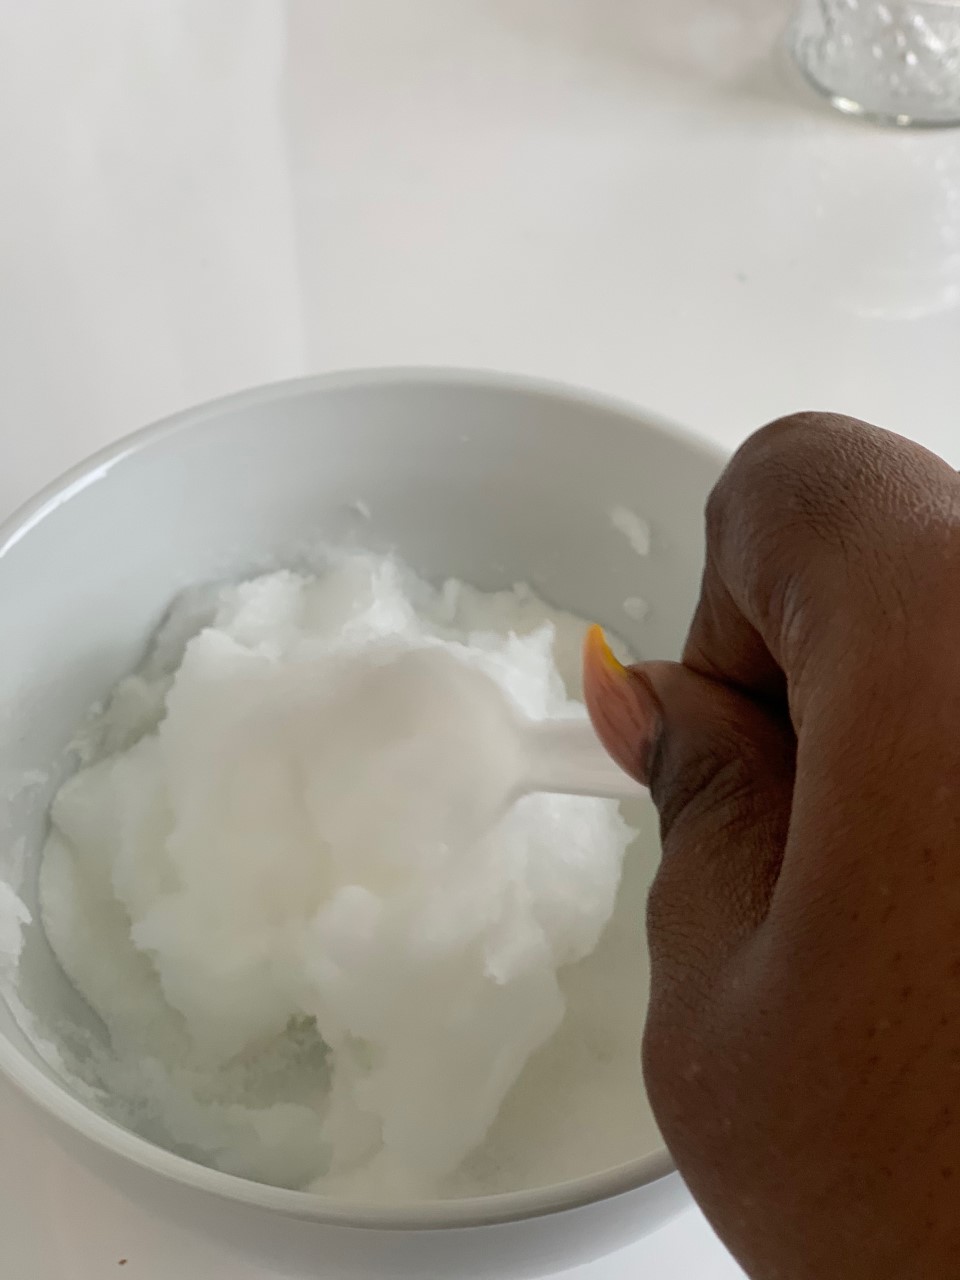 Mixing sugar and coconut oil in glass bowl.